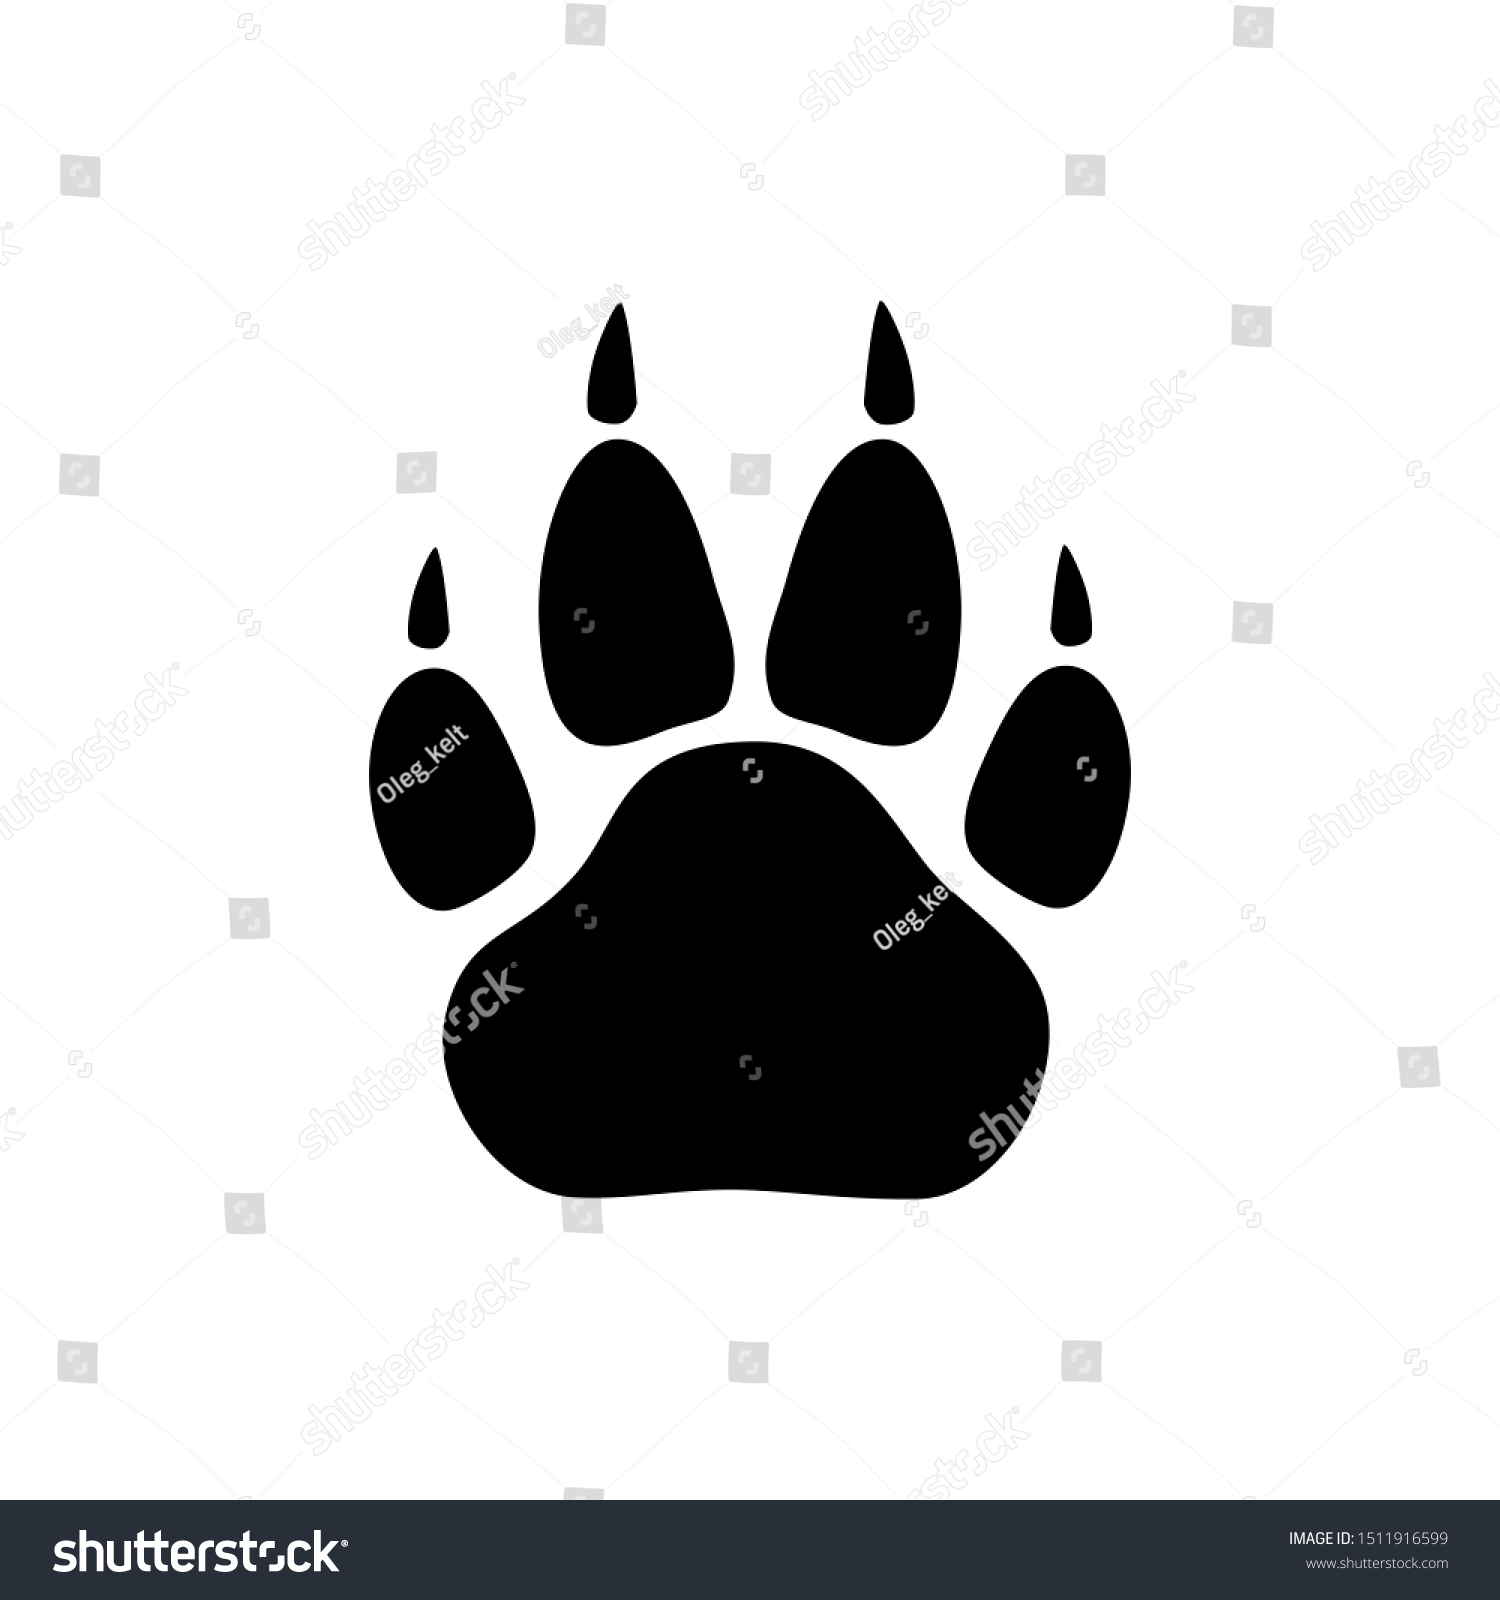 SVG of Black paw print icon with claws. cats or dogs. Traces. Vector illustration isolated on white background. svg